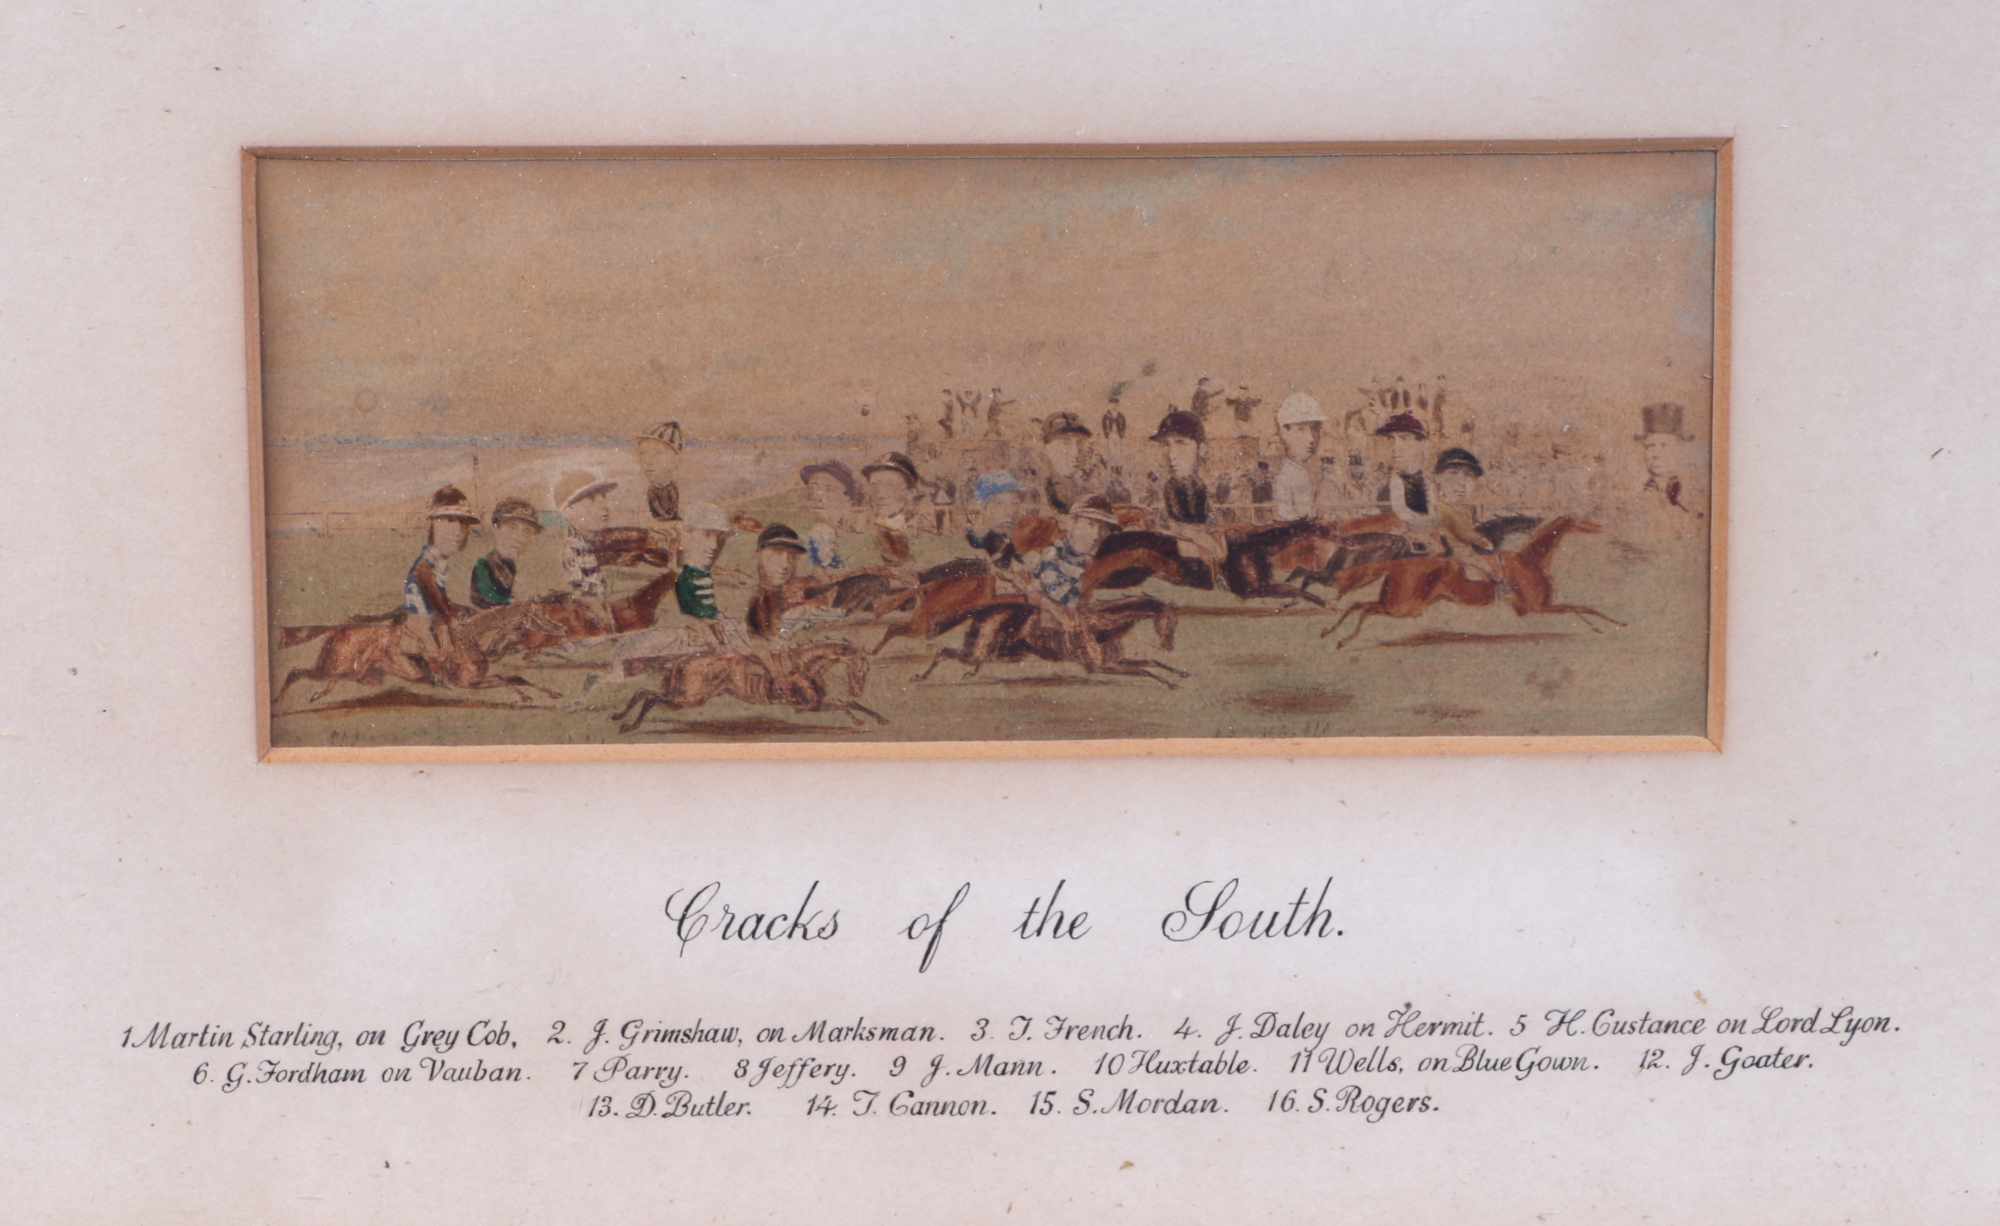 Horse racing interest. A coloured horse racing print, "Cracks of the North", photographed and - Image 5 of 5